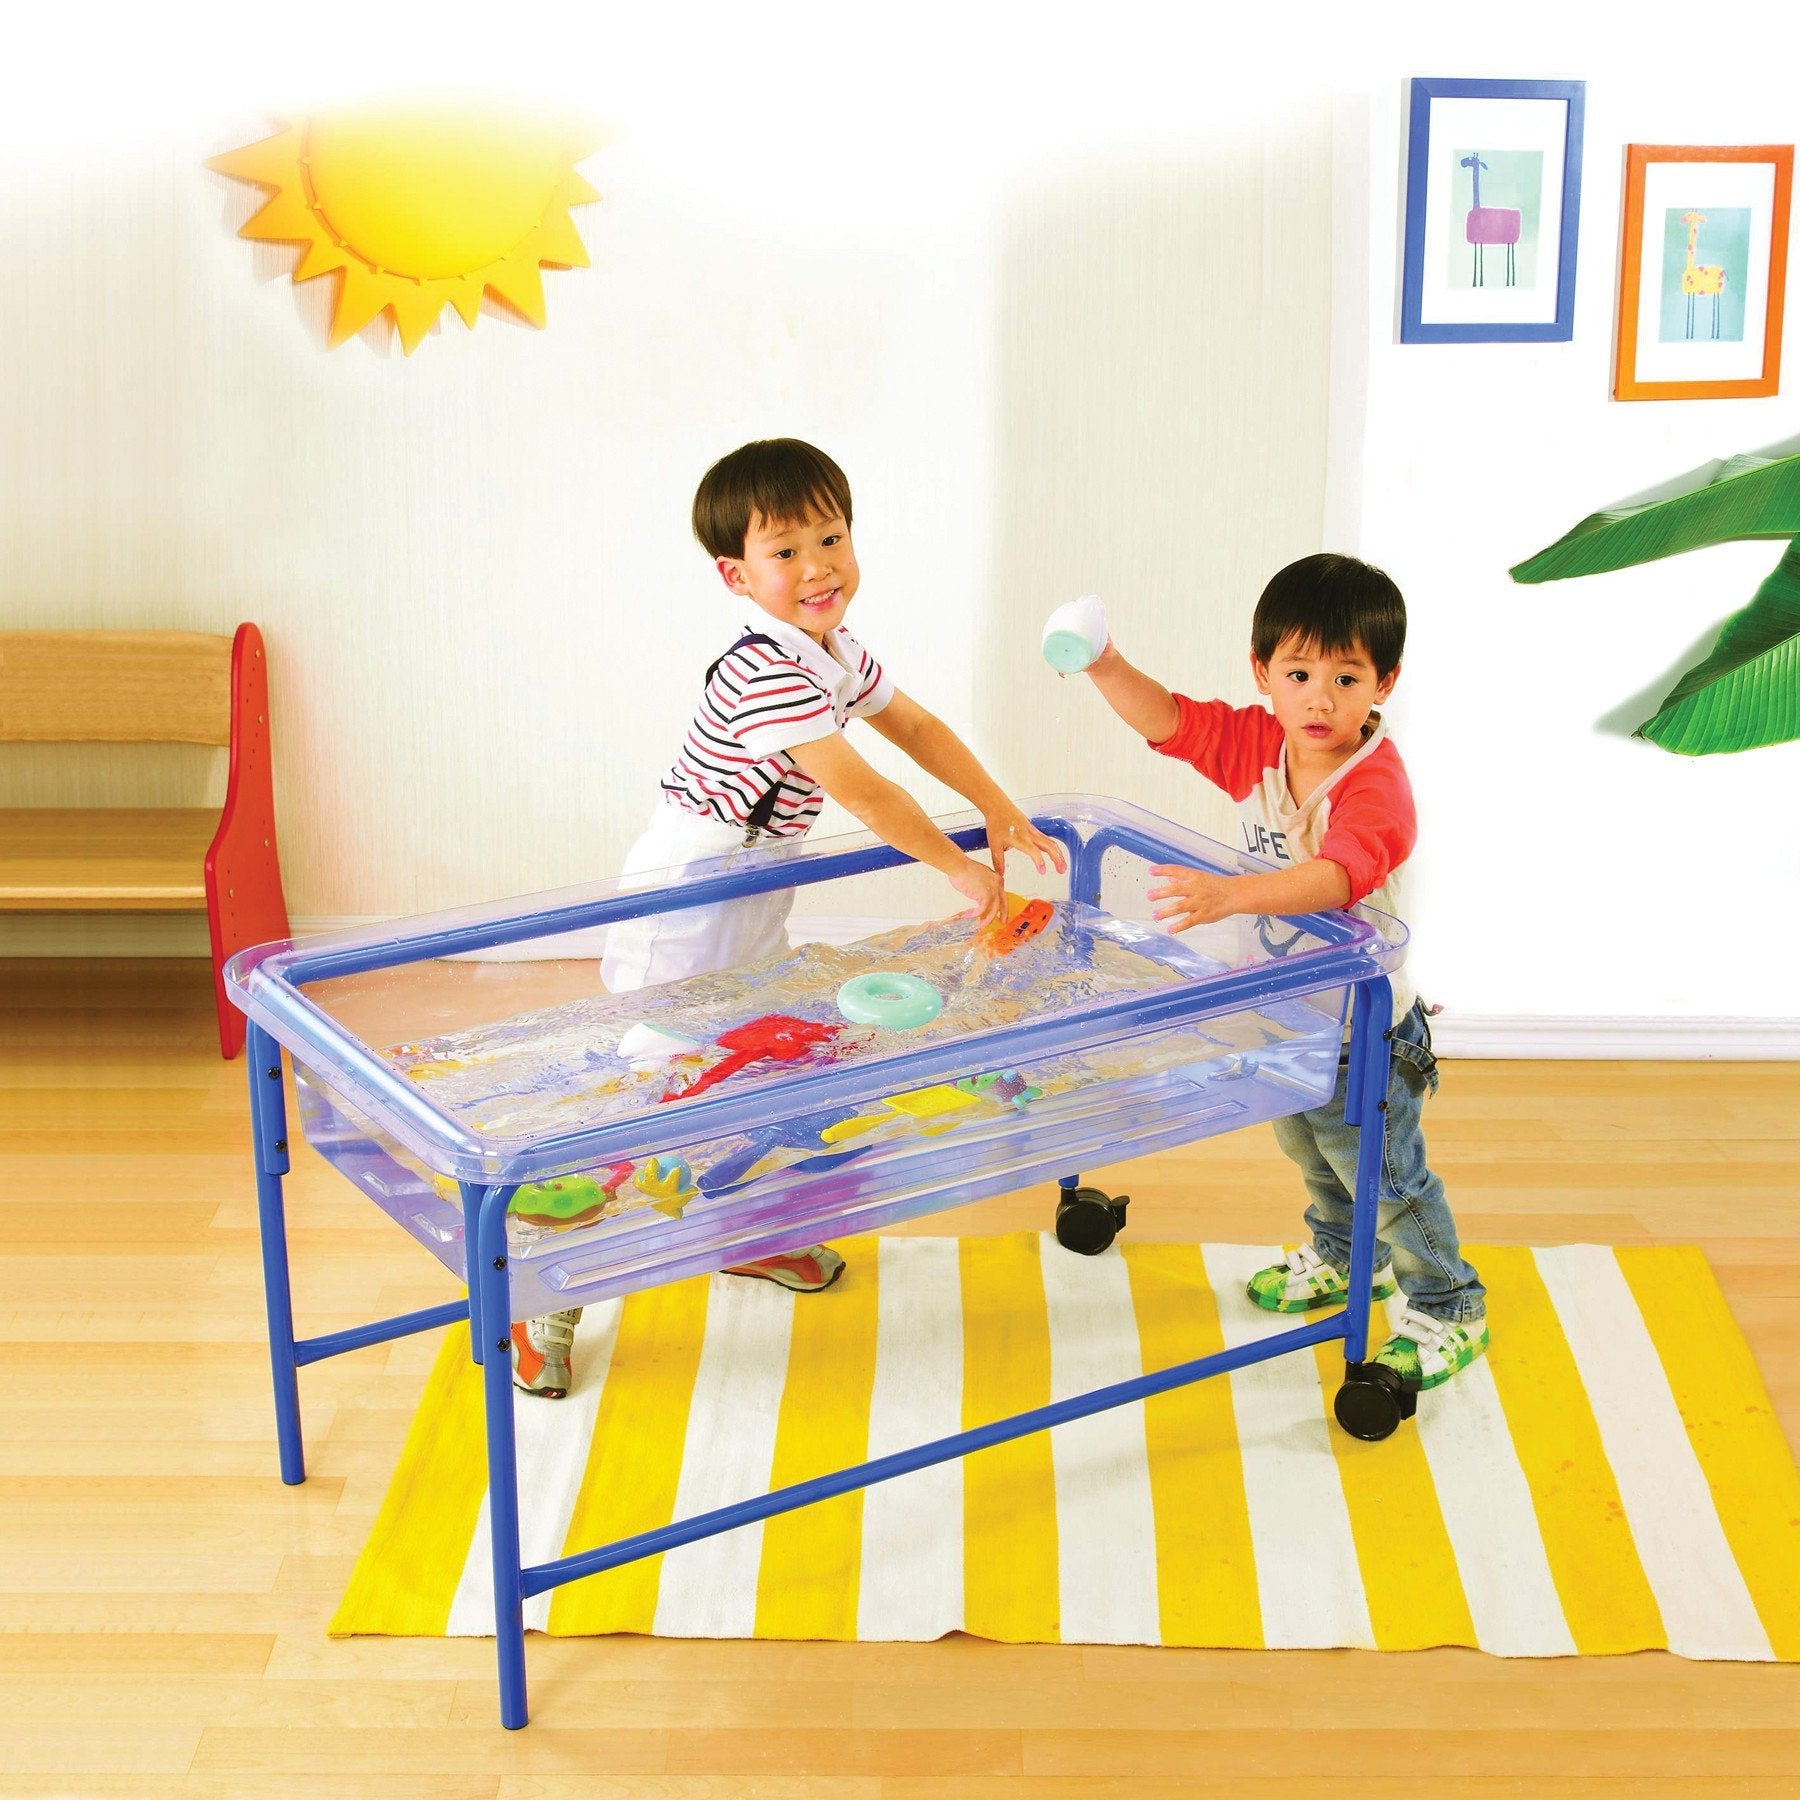 Sand & Water Play Table, Toddler